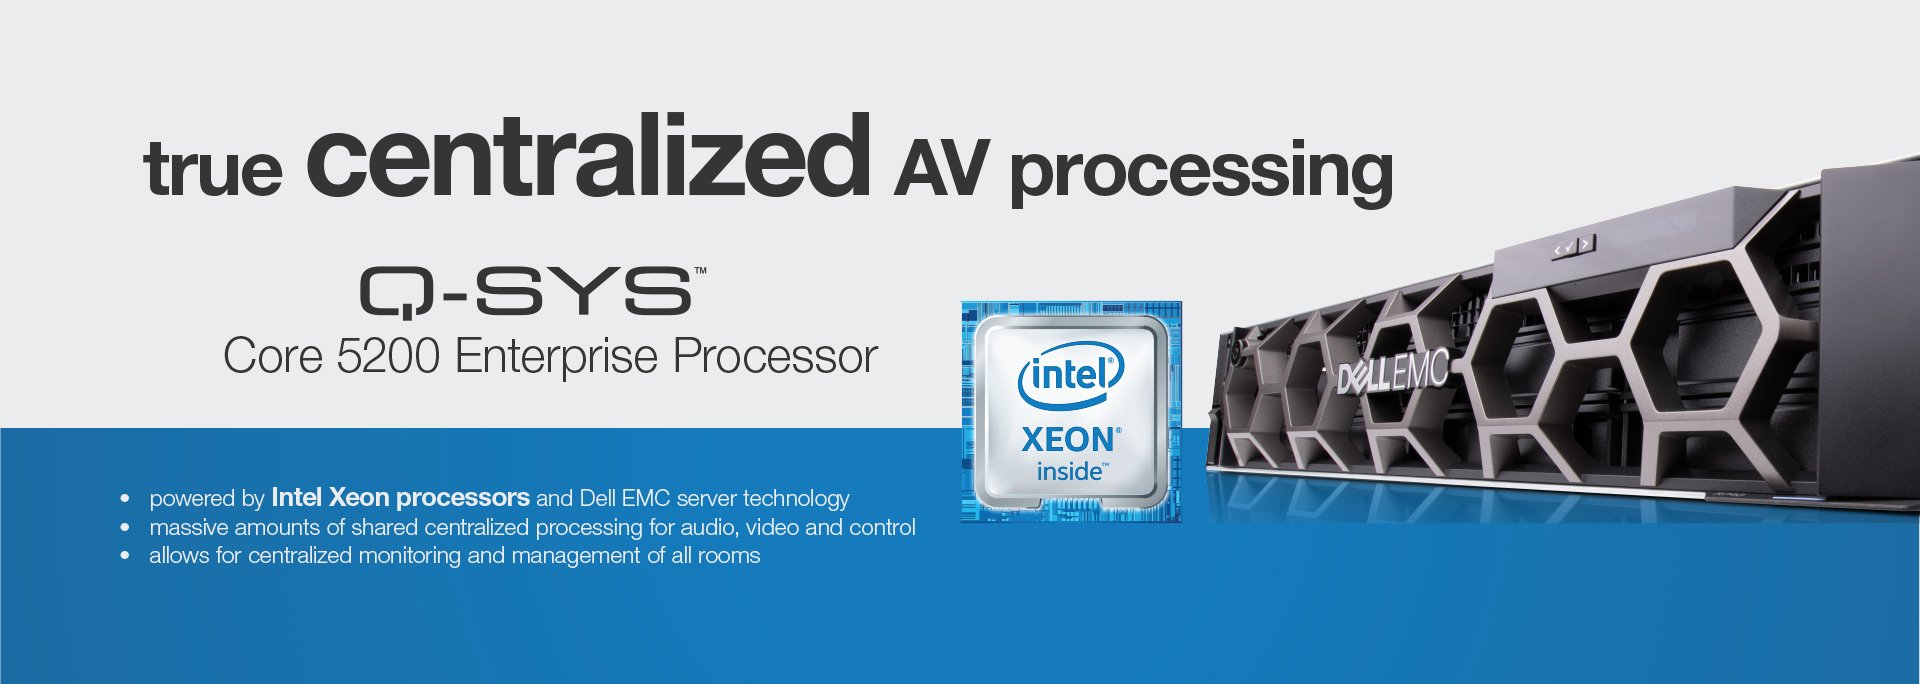 Banner describing some features of the Q-SYS Core 5200 Enterprise Processor which uses an Intel Xeon processor